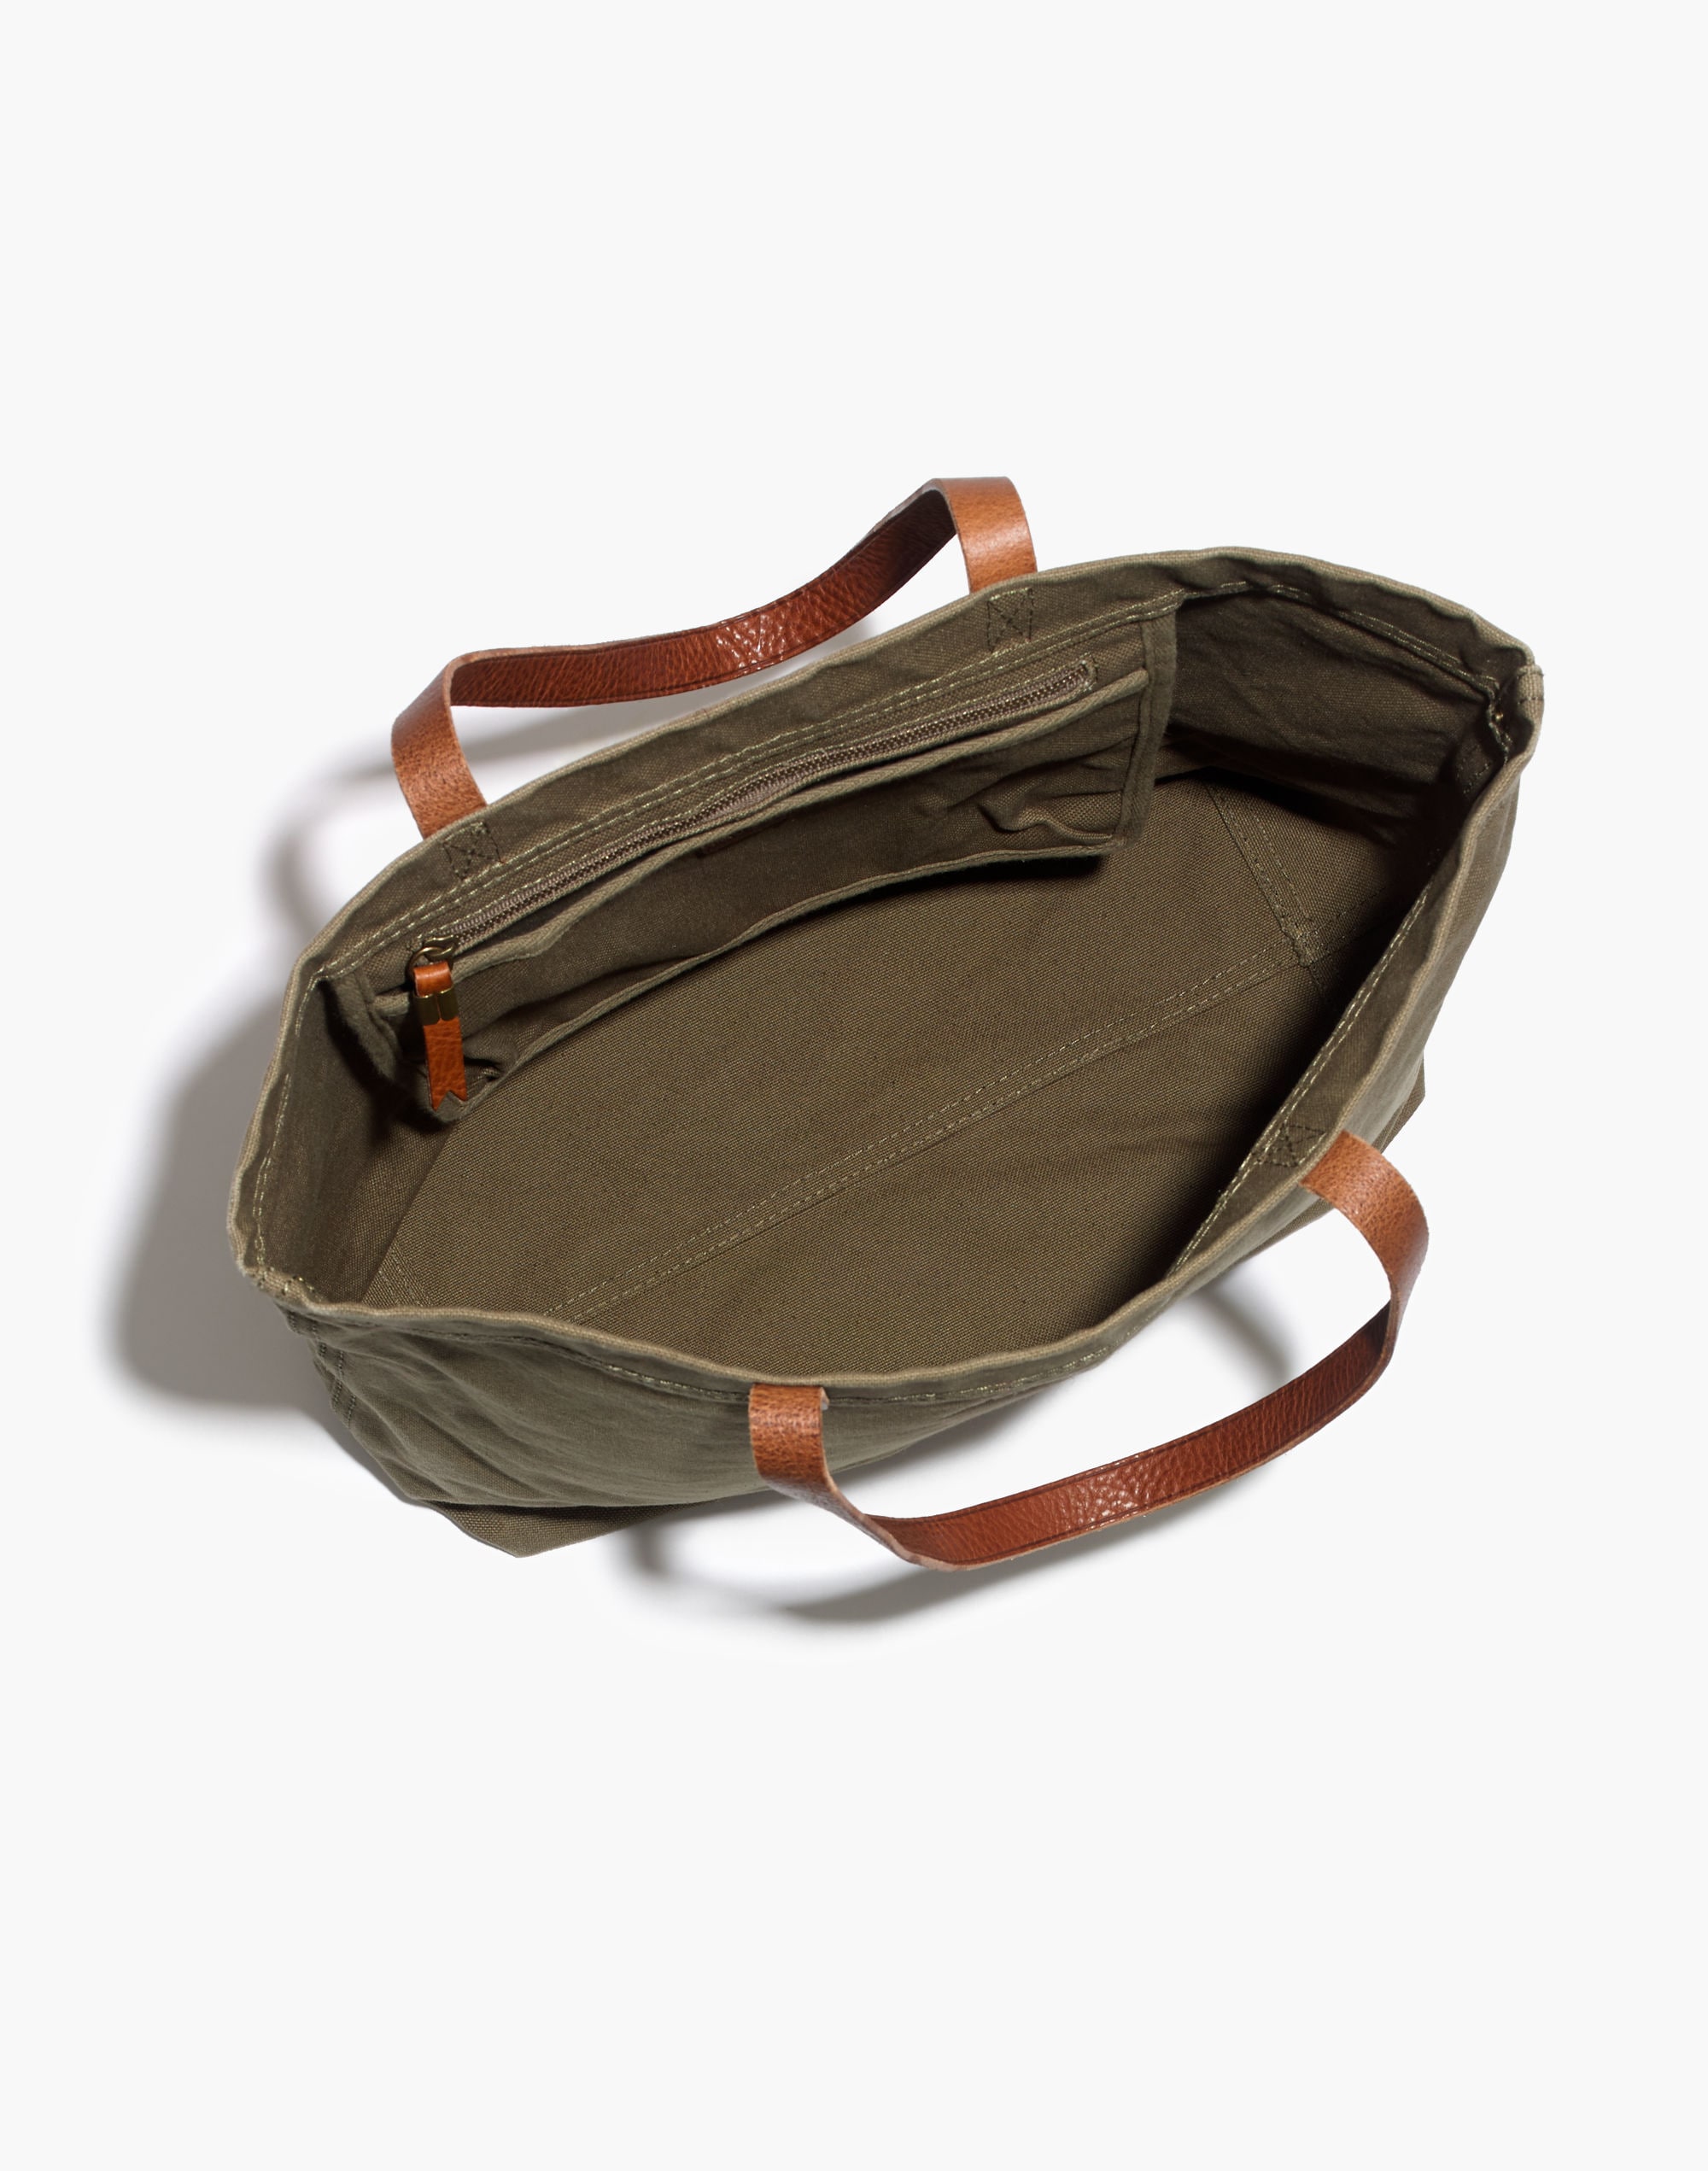 Madewell, Bags, Madewell Olive Green Canvas Transport Tote Bag